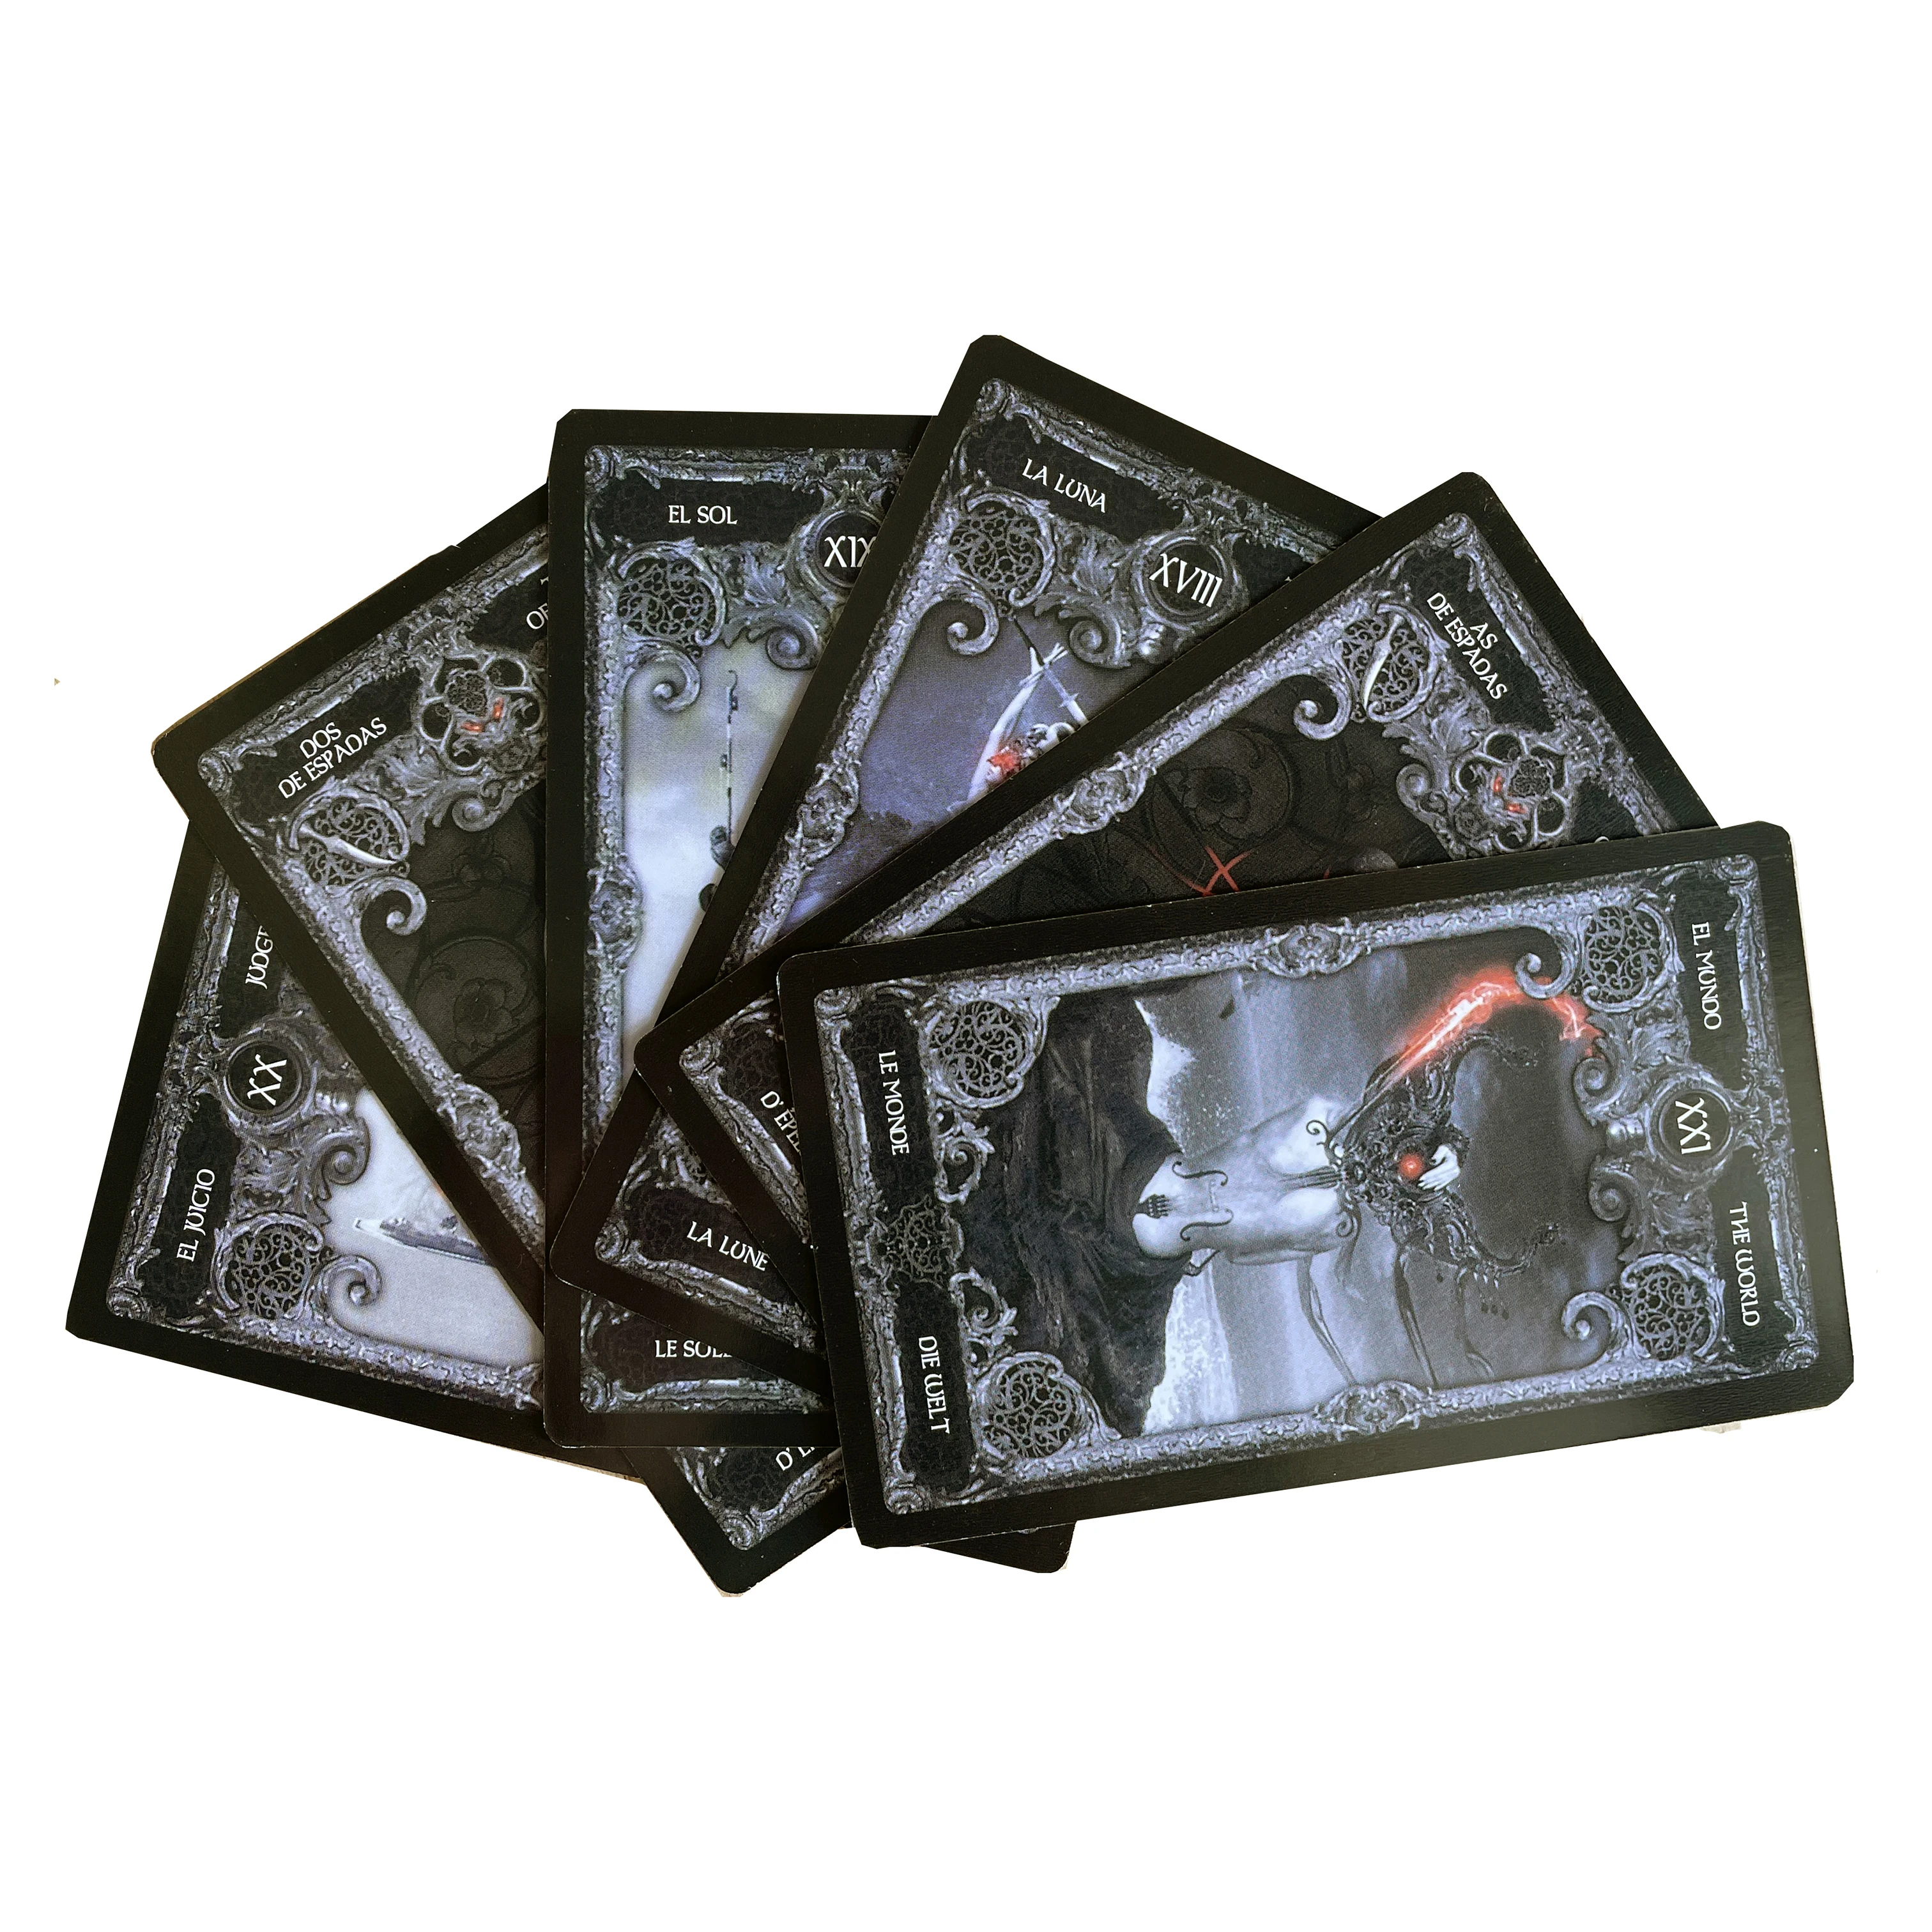 Dark tarot card deck for beginners , Unique tarot cards deck with guidebook , Full tarot decks 78 cards ,Beautiful oracle cards traditional standard tarot decks 78 pink foil tarot cards holographic tarot deck with guidebook fortune telling game card tarot